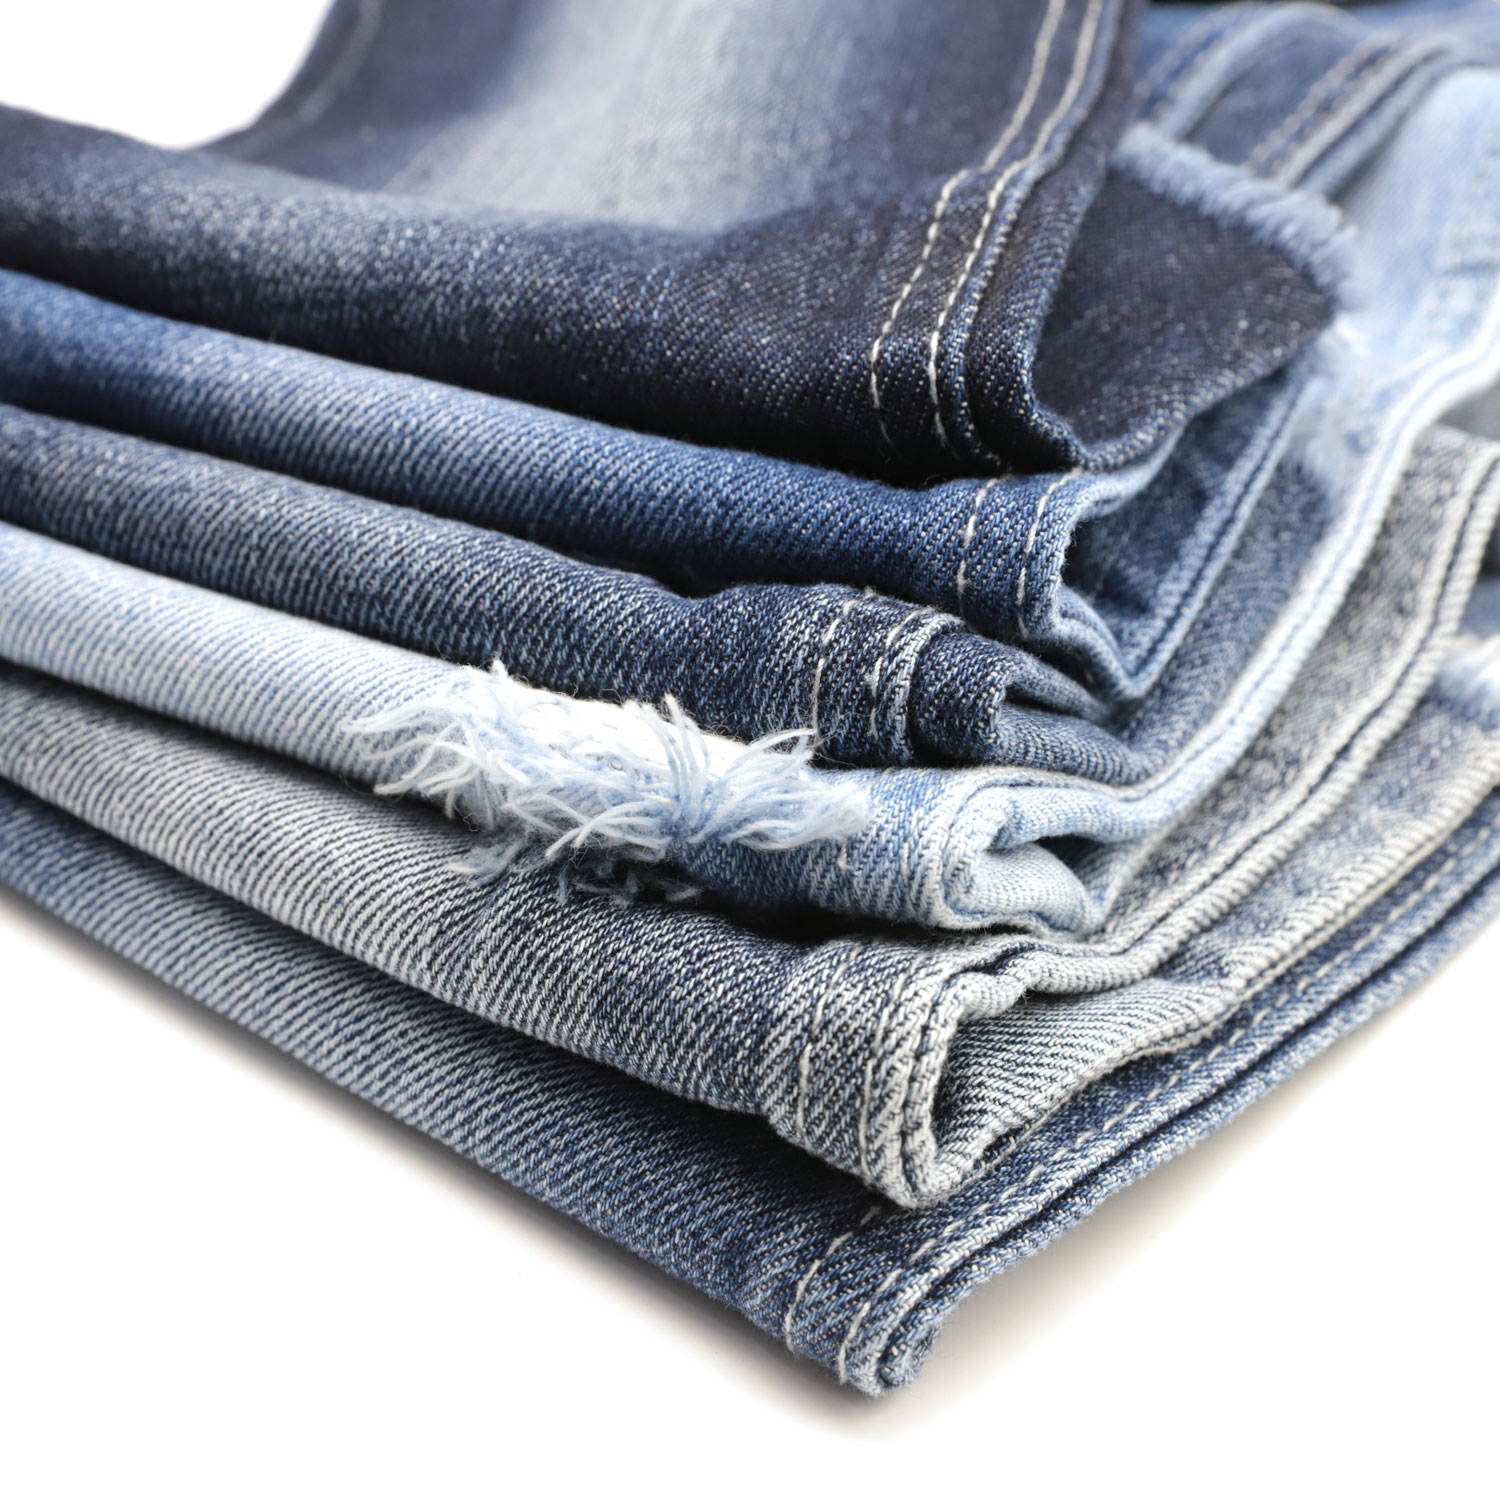 Believe the Hype! 4 Raw Denim Care Myths That Arent All Busted 1